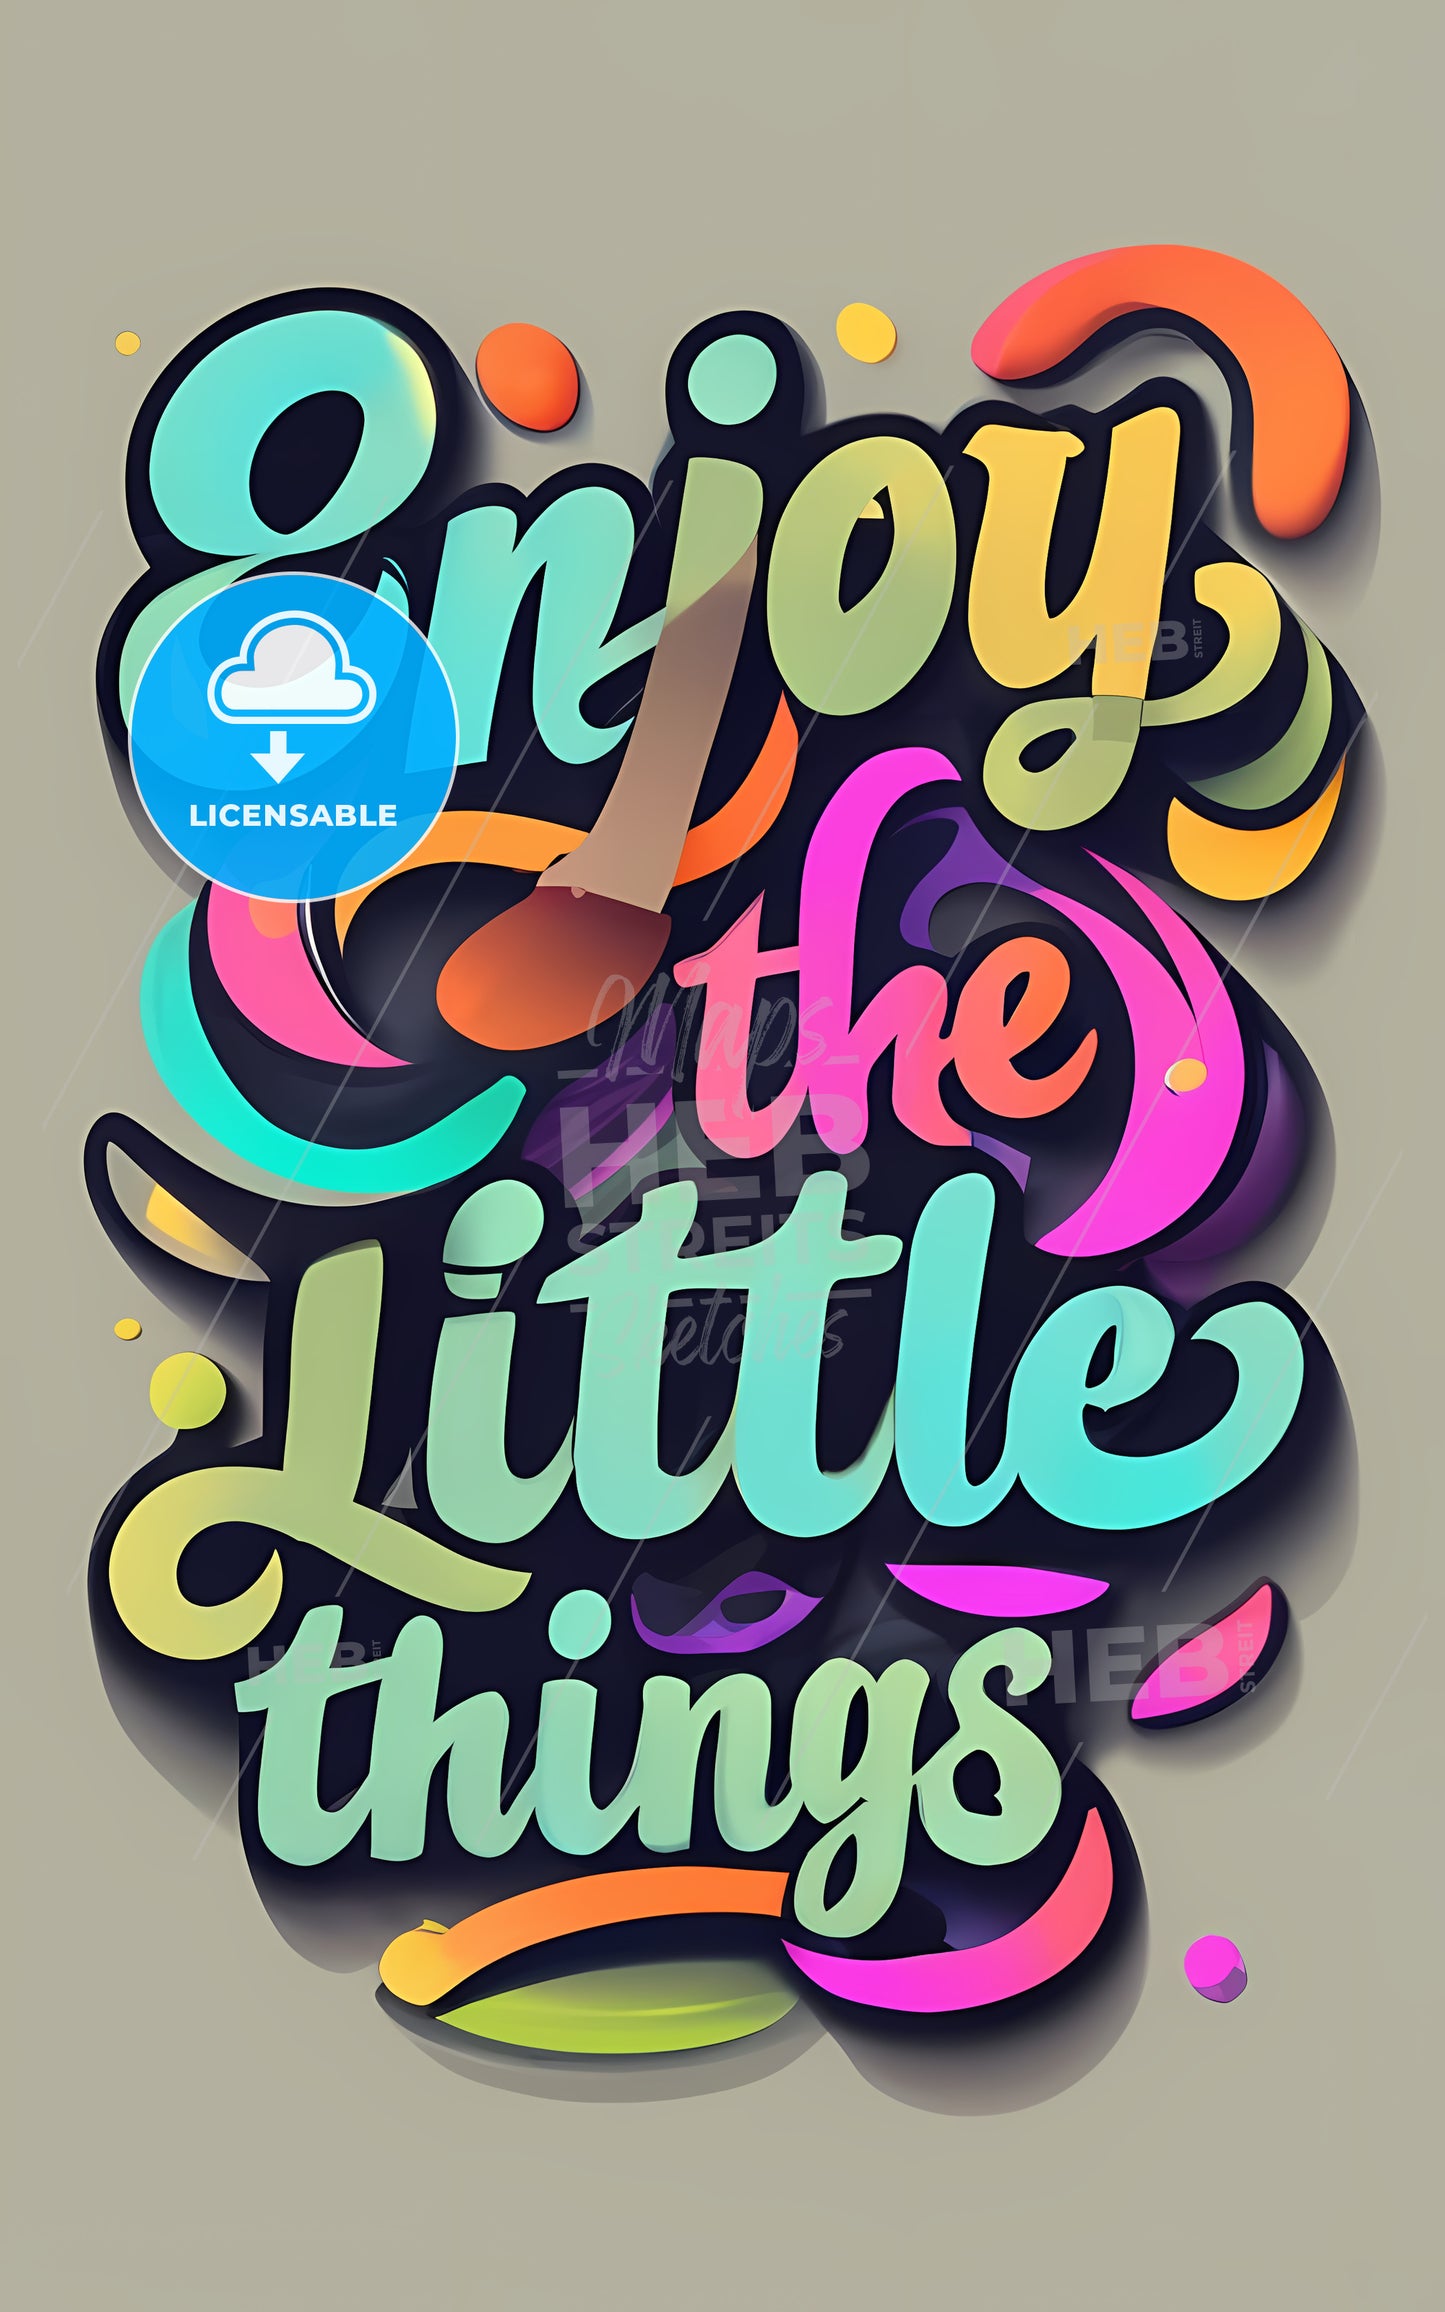 Enjoy The Little Things - A Colorful Text With A Brush